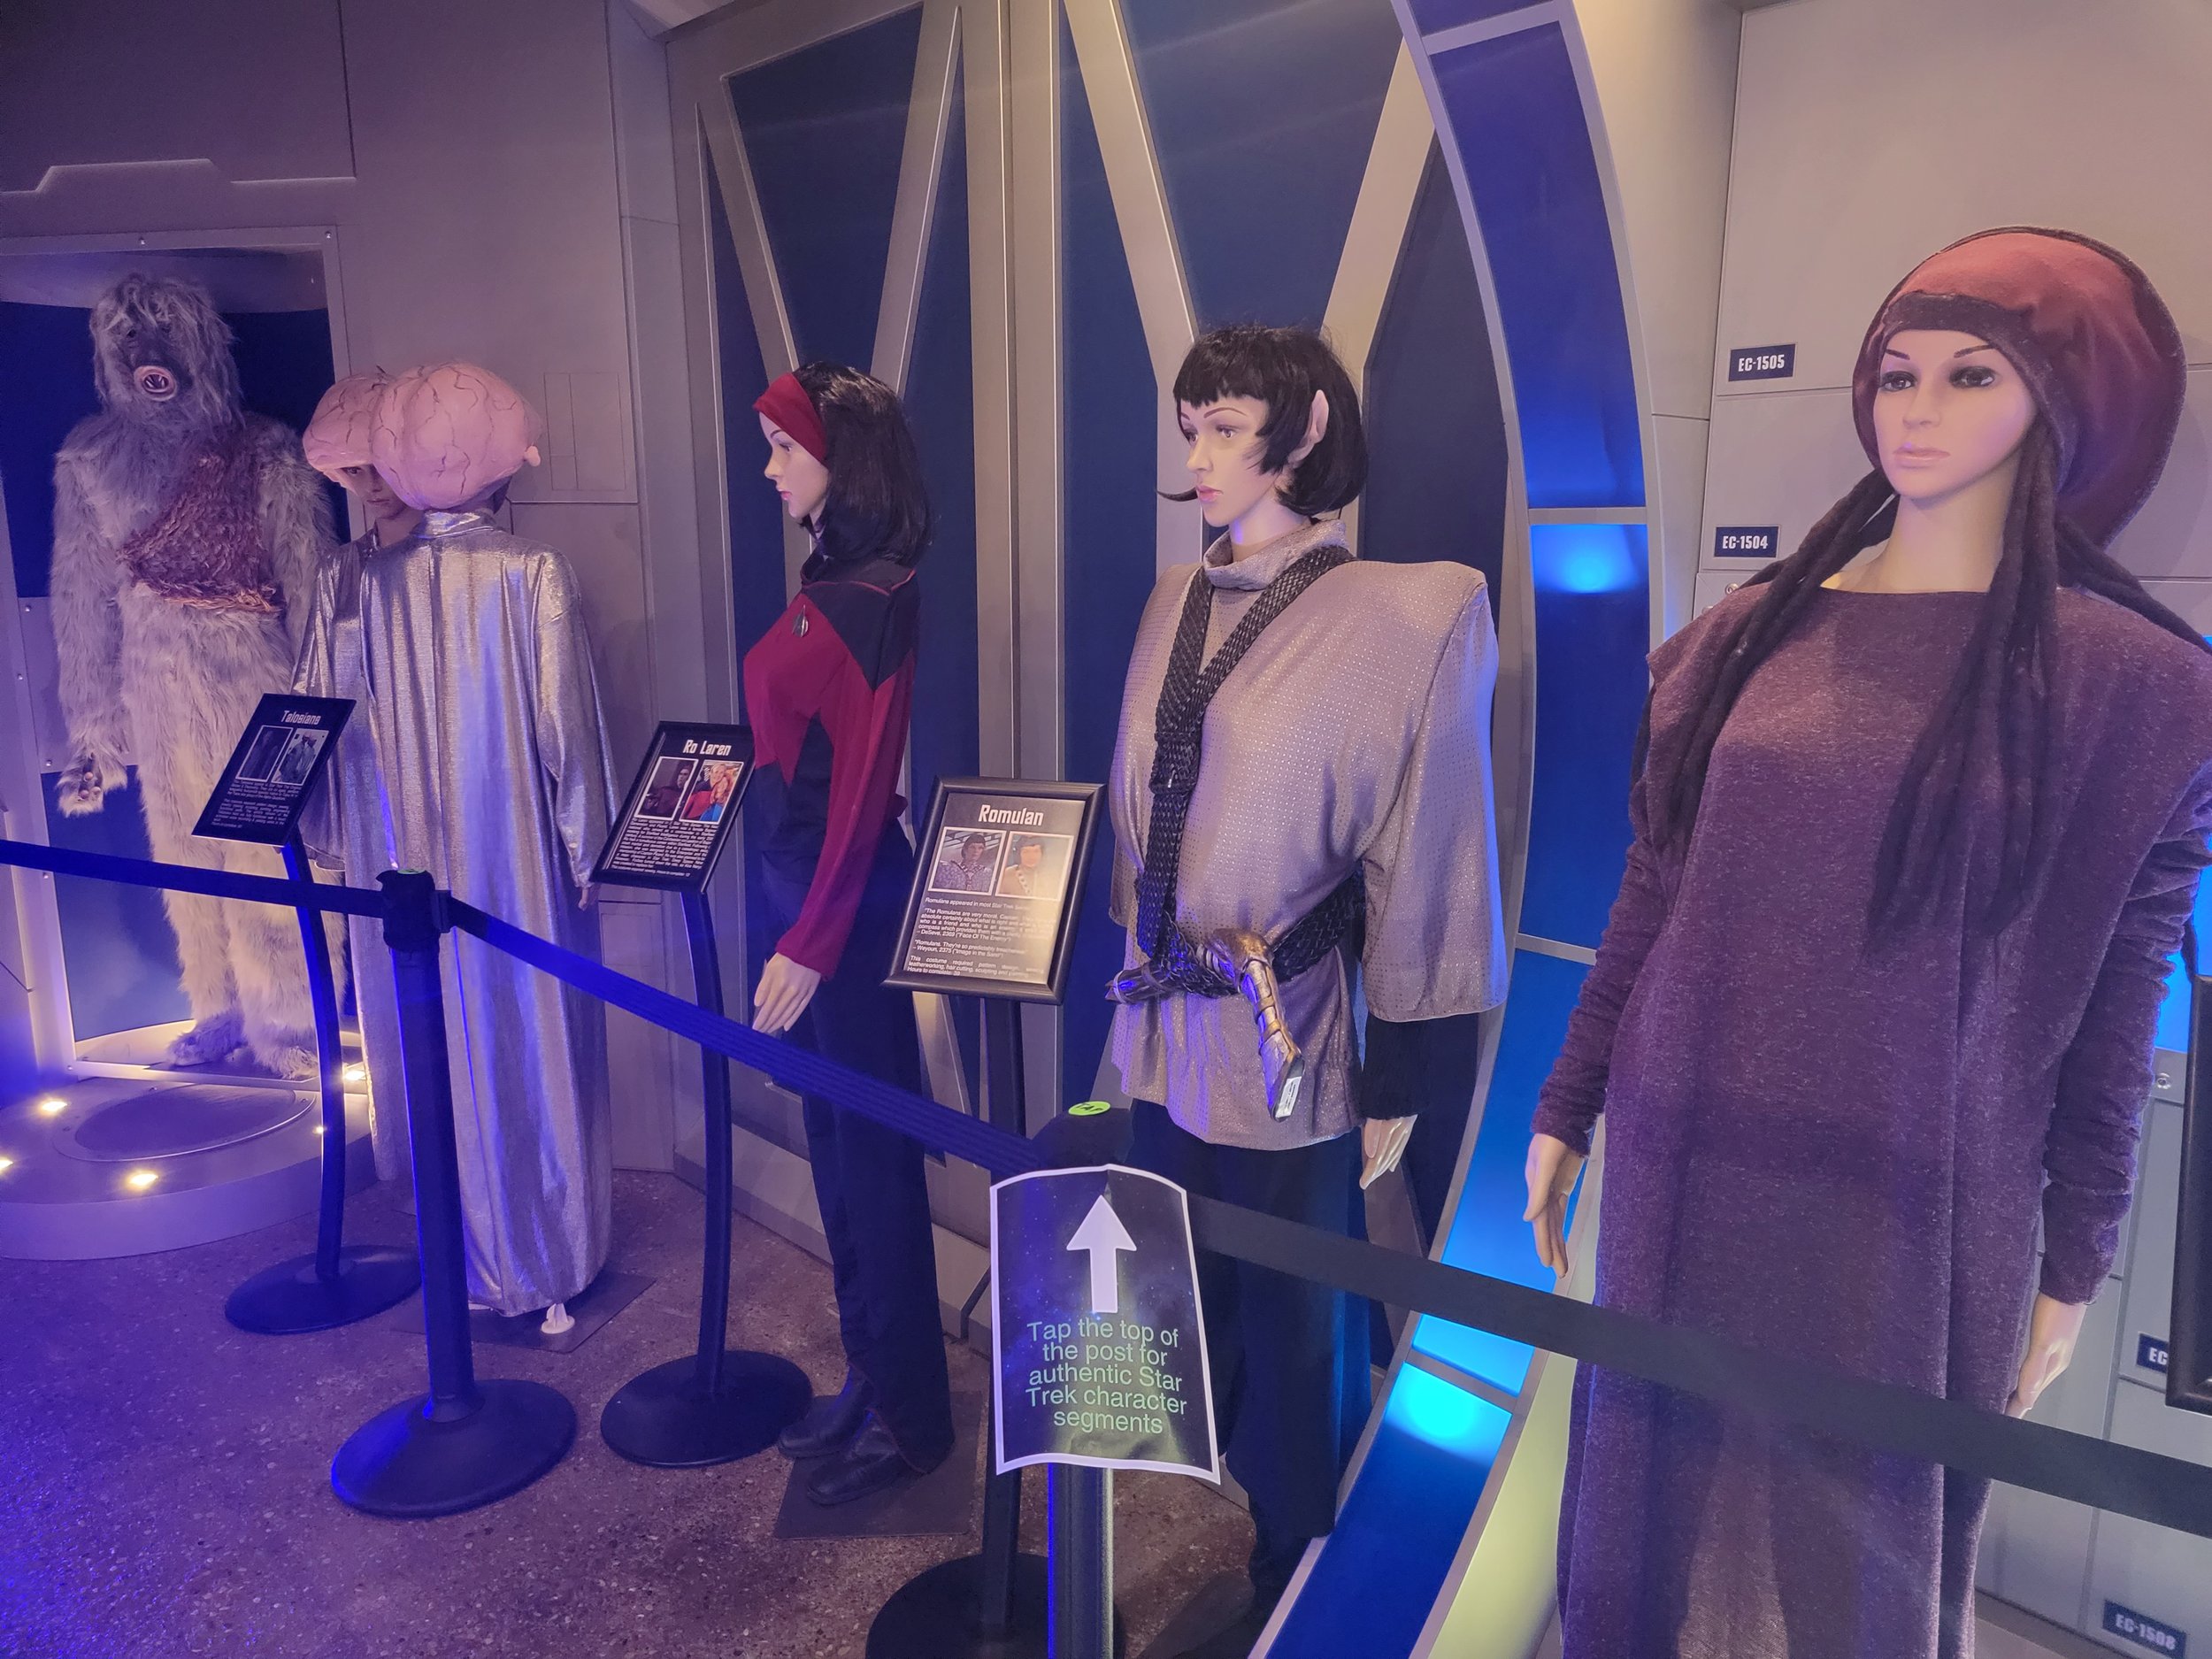 They have a little area with fan-made costume replicas. I'll just let you enjoy that.